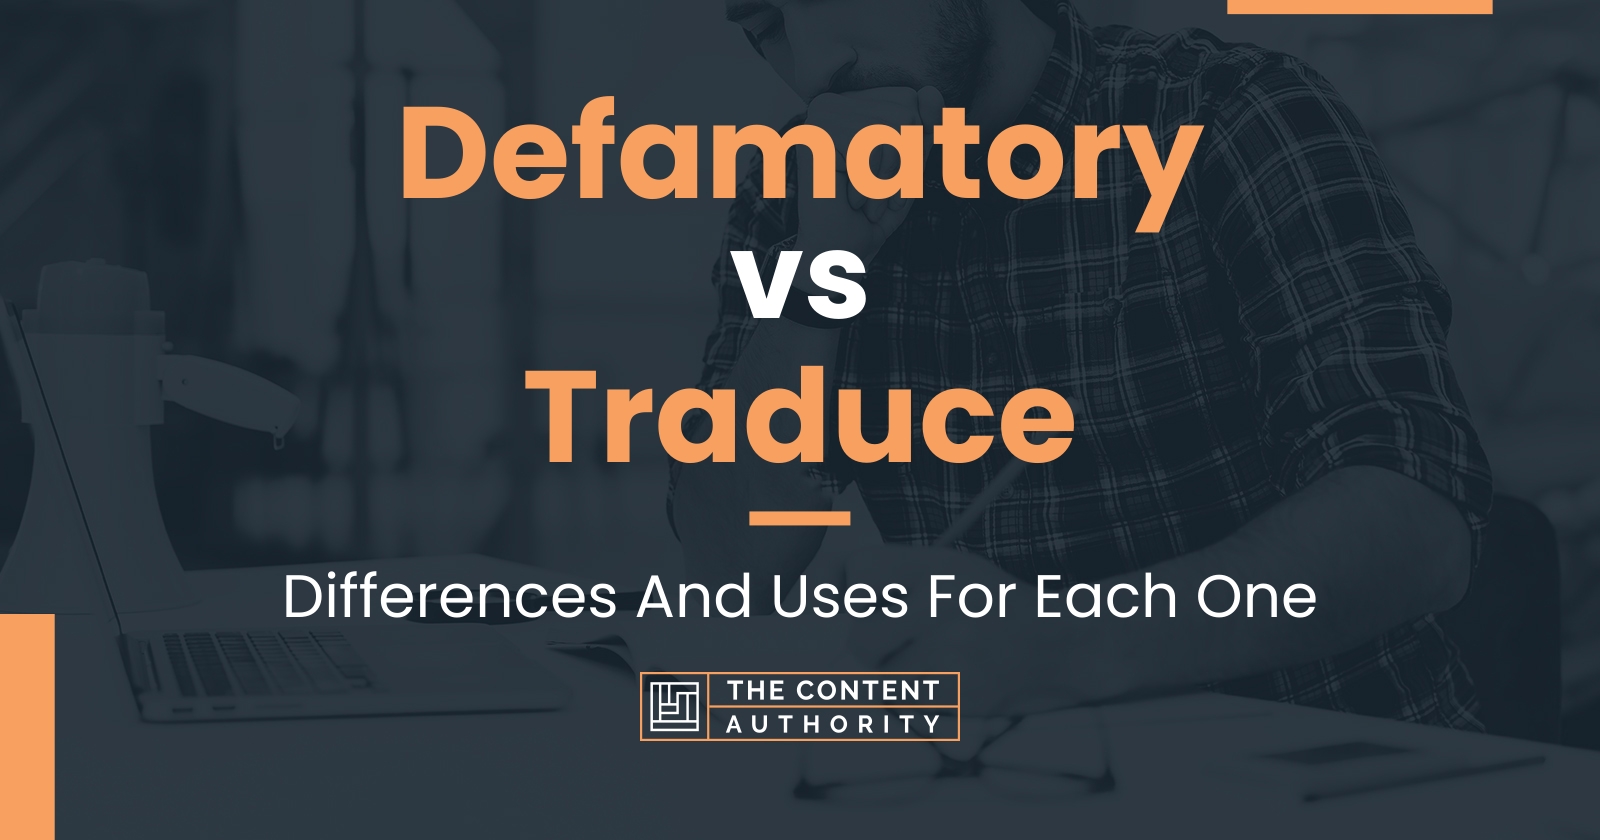 Defamatory vs Traduce: Differences And Uses For Each One